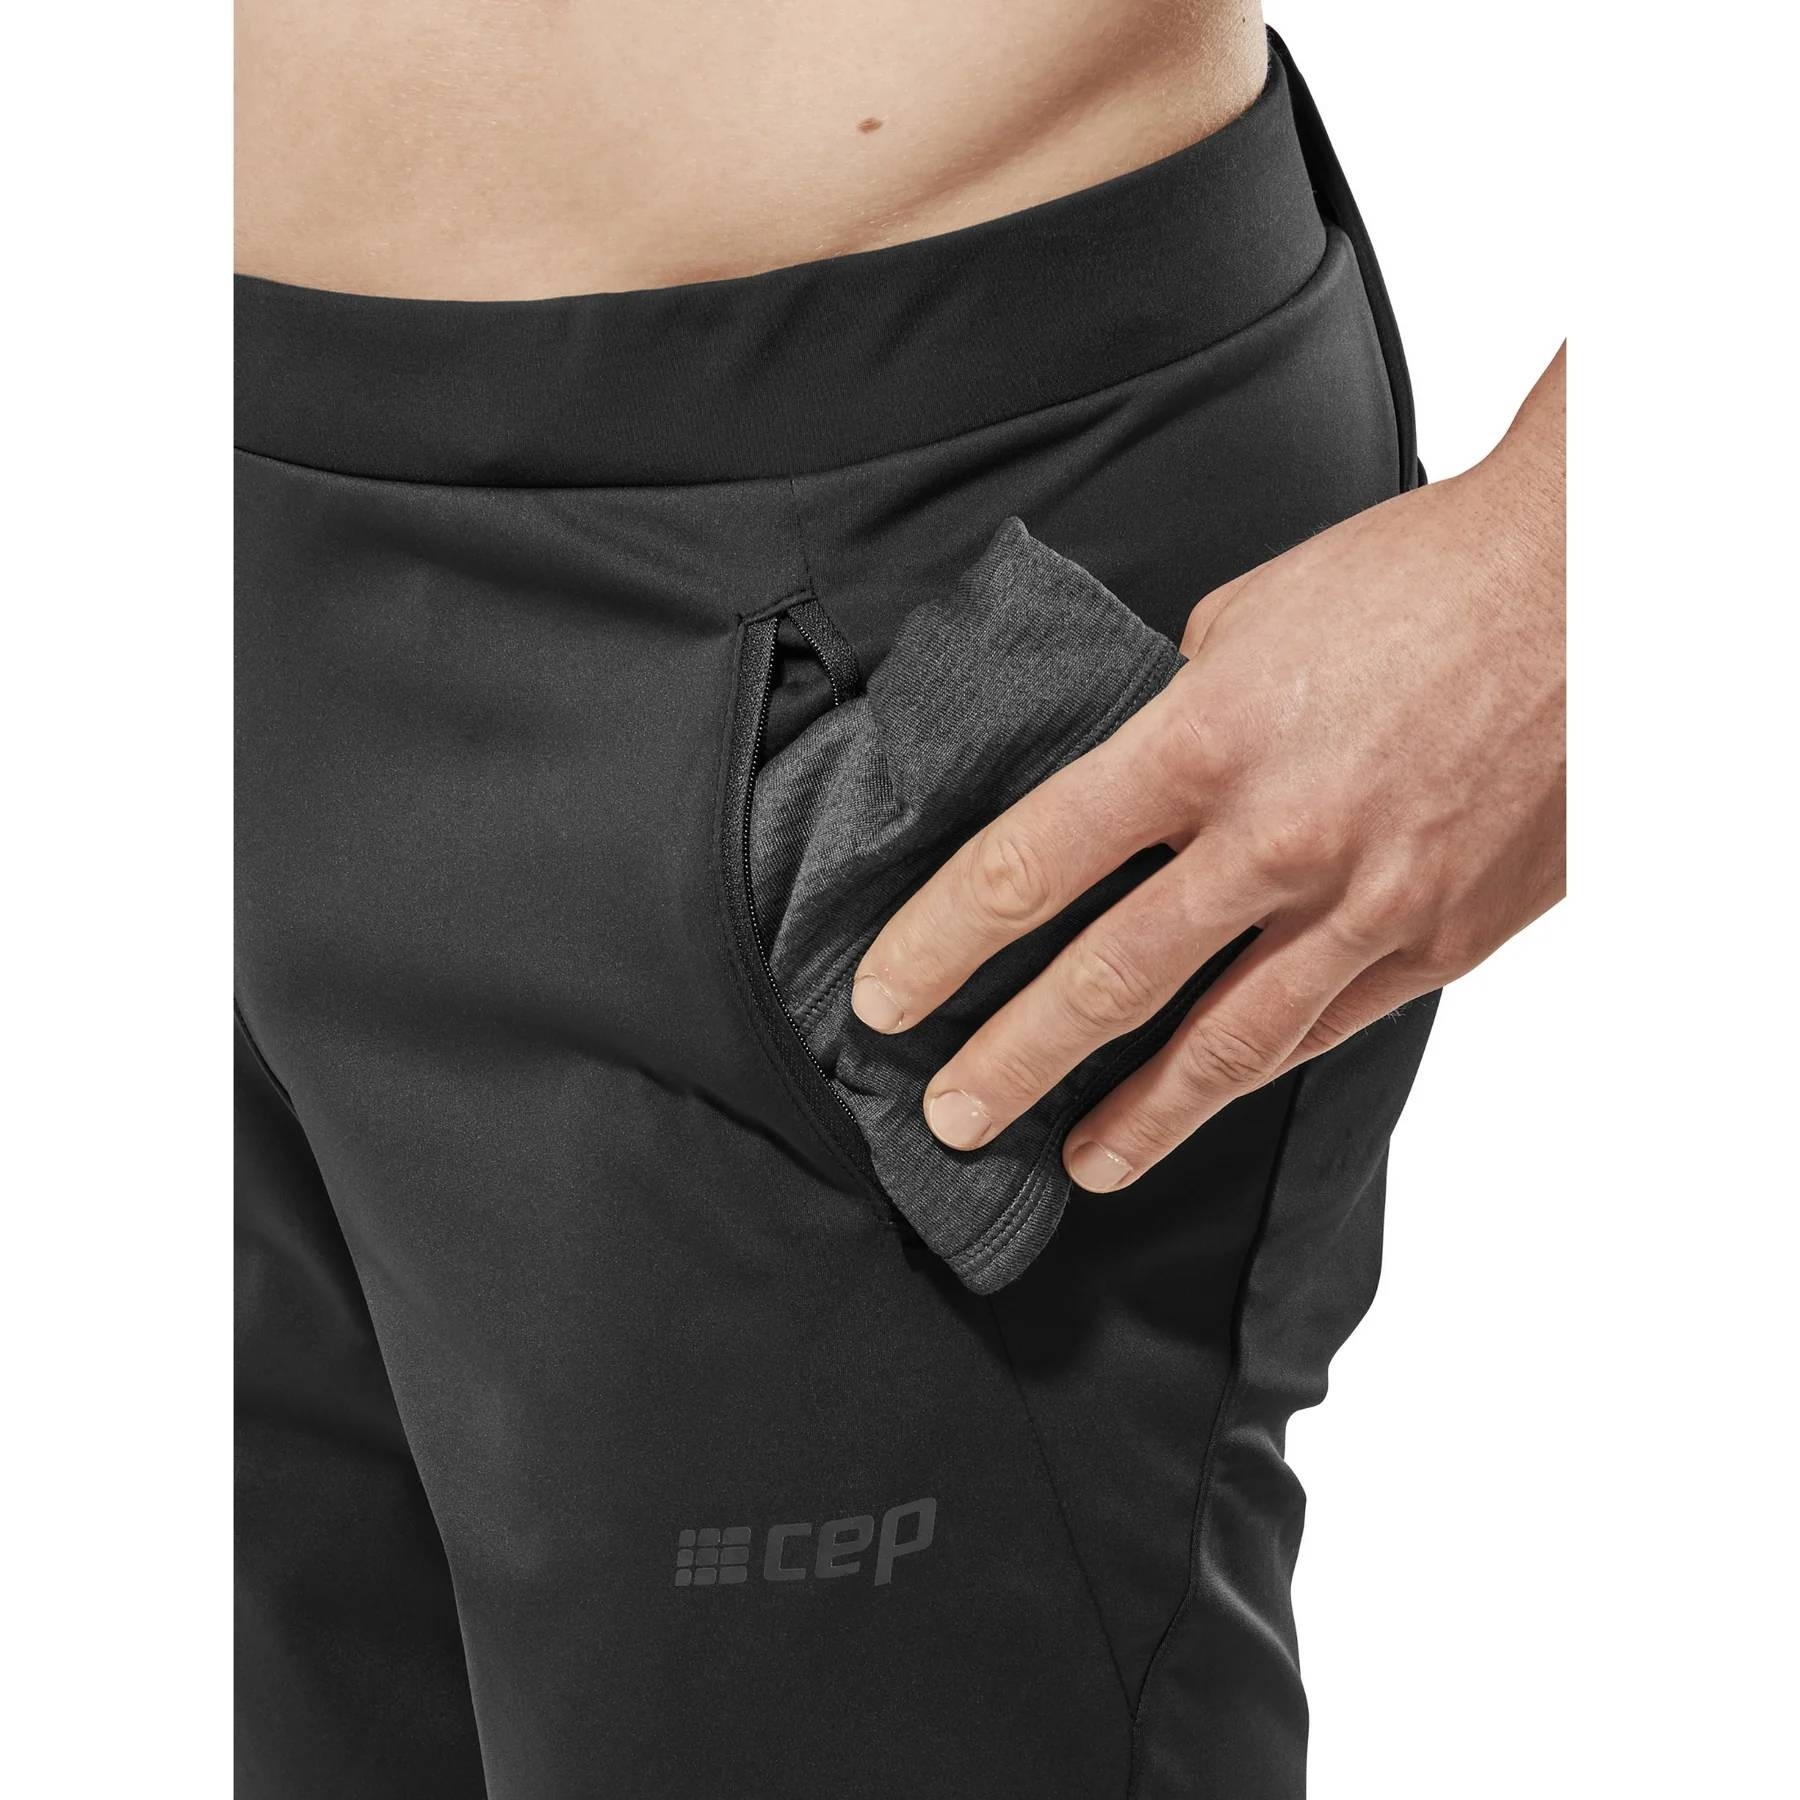 CEP Cold weather compression socks tall